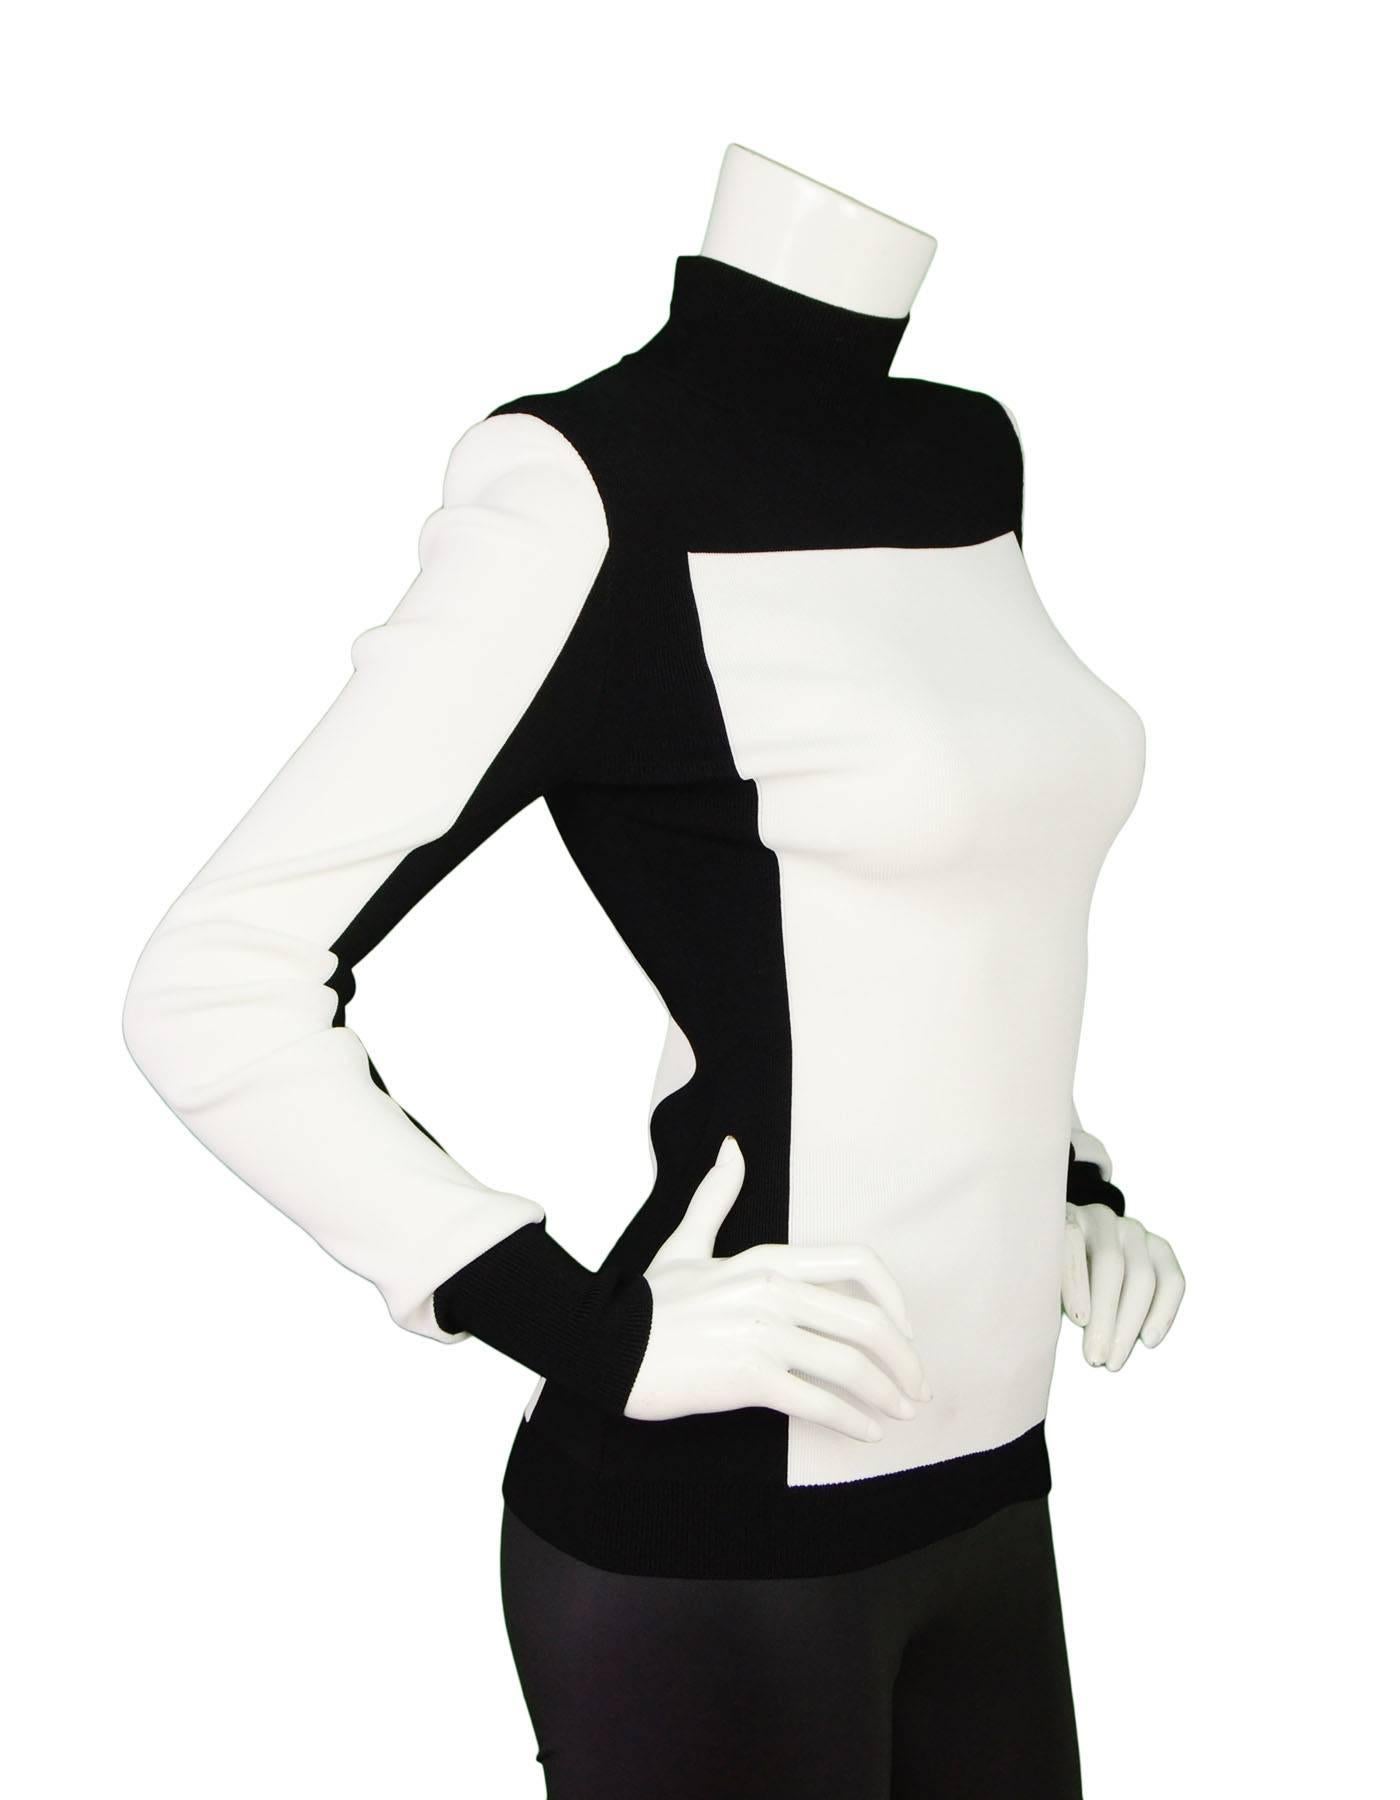 Balmain x H&M Black and White Turtleneck Sz 6

Features gold-tone back zip closure and light shoulder padding

Color: Black and white
Composition: 989% Viscose, 10% polyamide, 1% elastane
Lining: None
Closure/Opening: Zip closure at